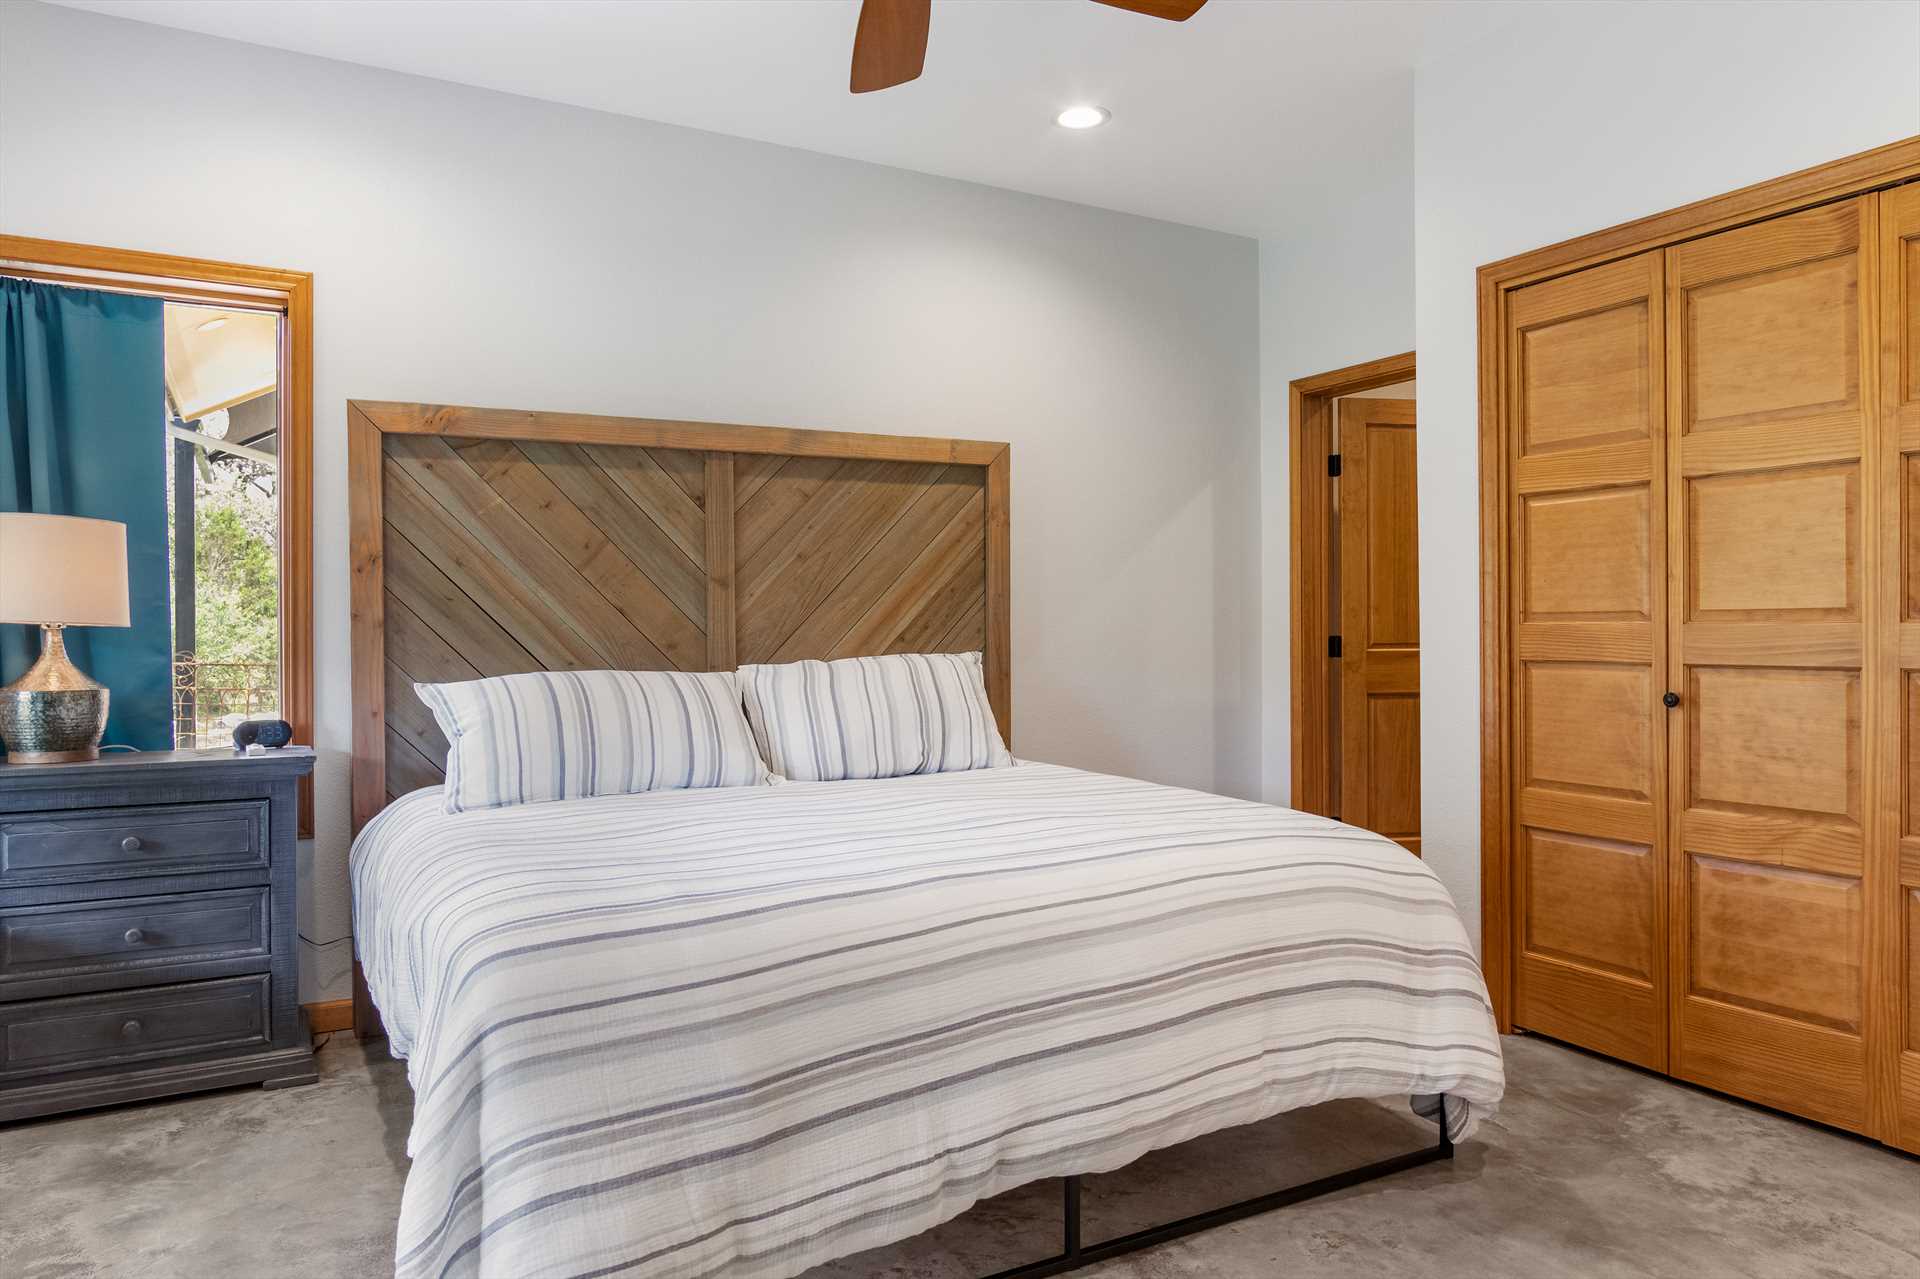                                                 The second master bedroom (yup, there are two!) features a restful and soft king-sized bed.